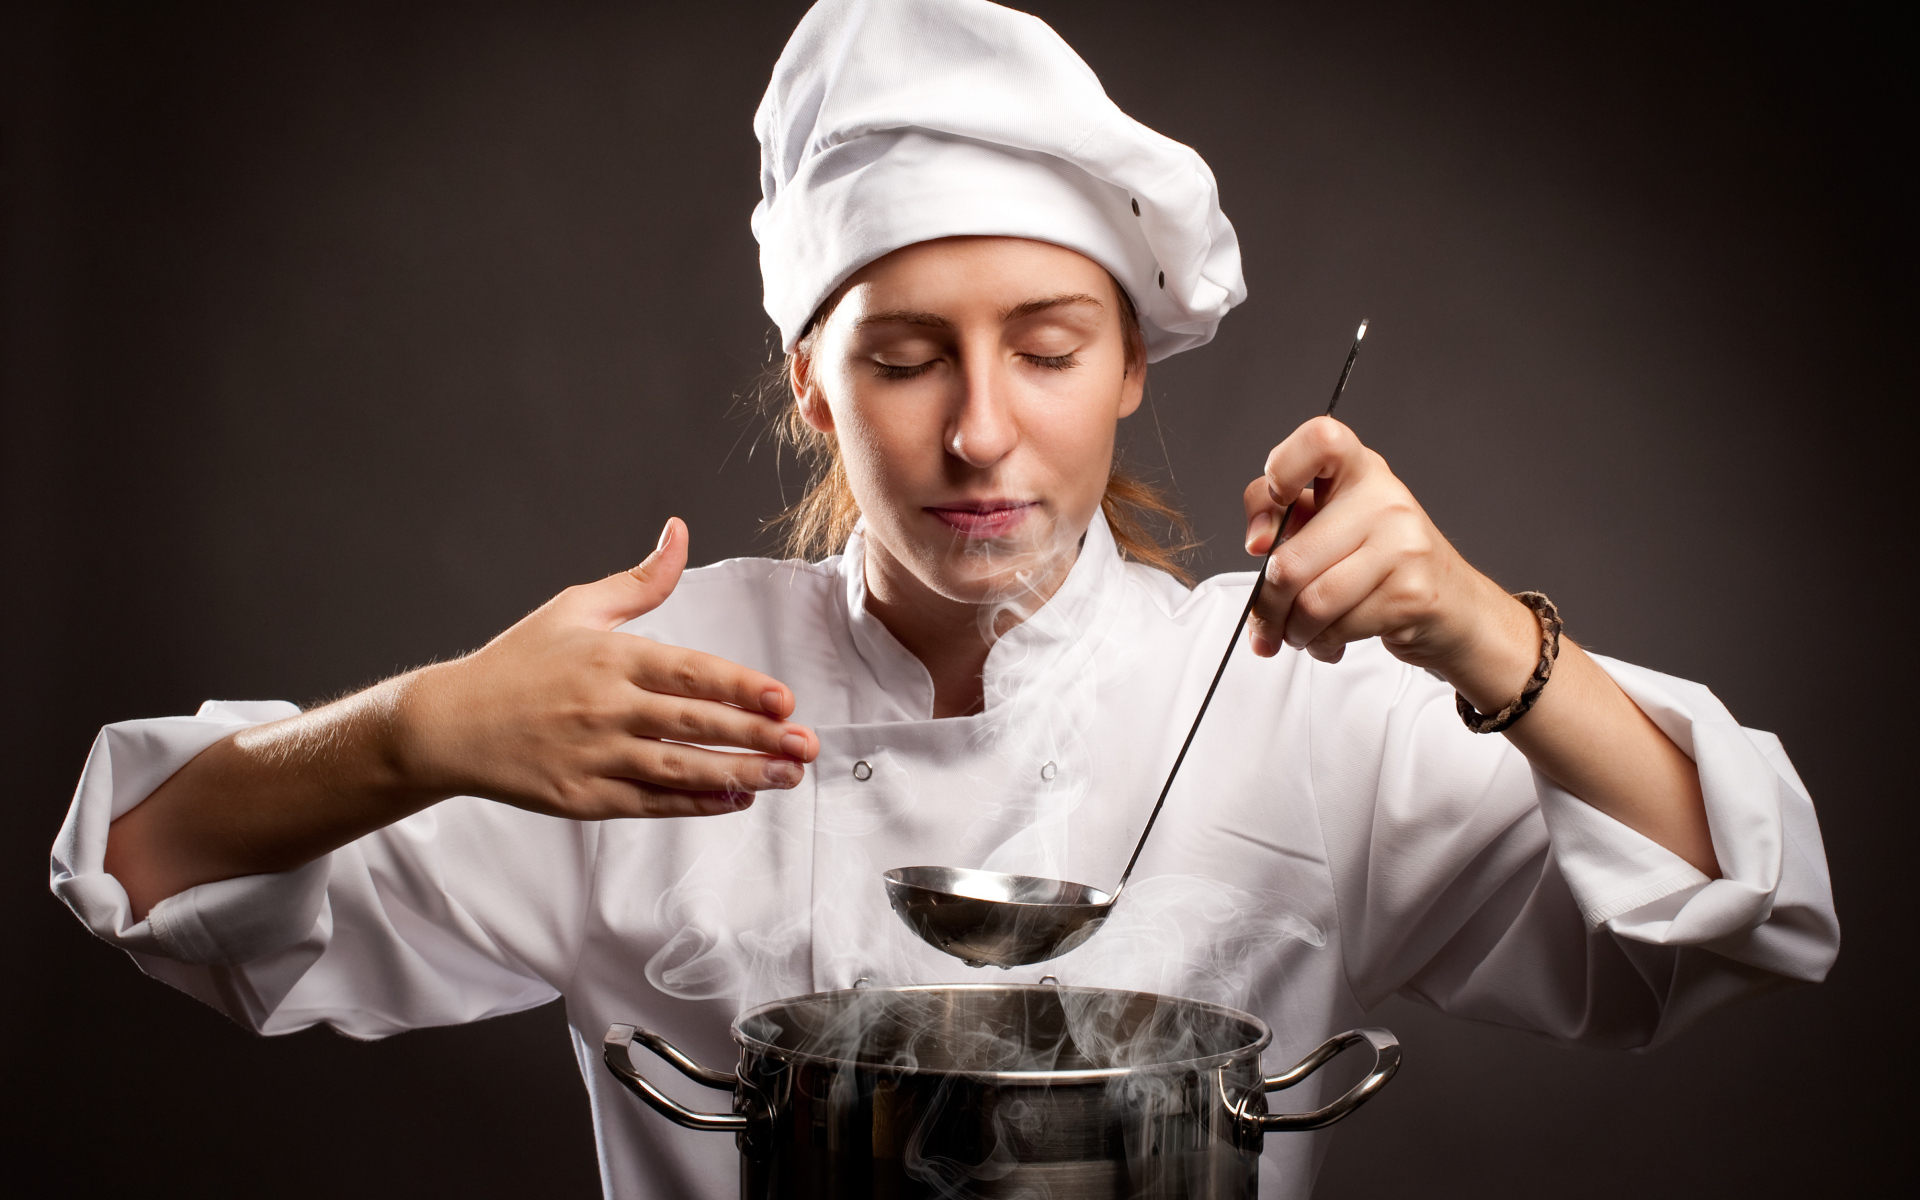 Girl cook inhales the aroma of the dish